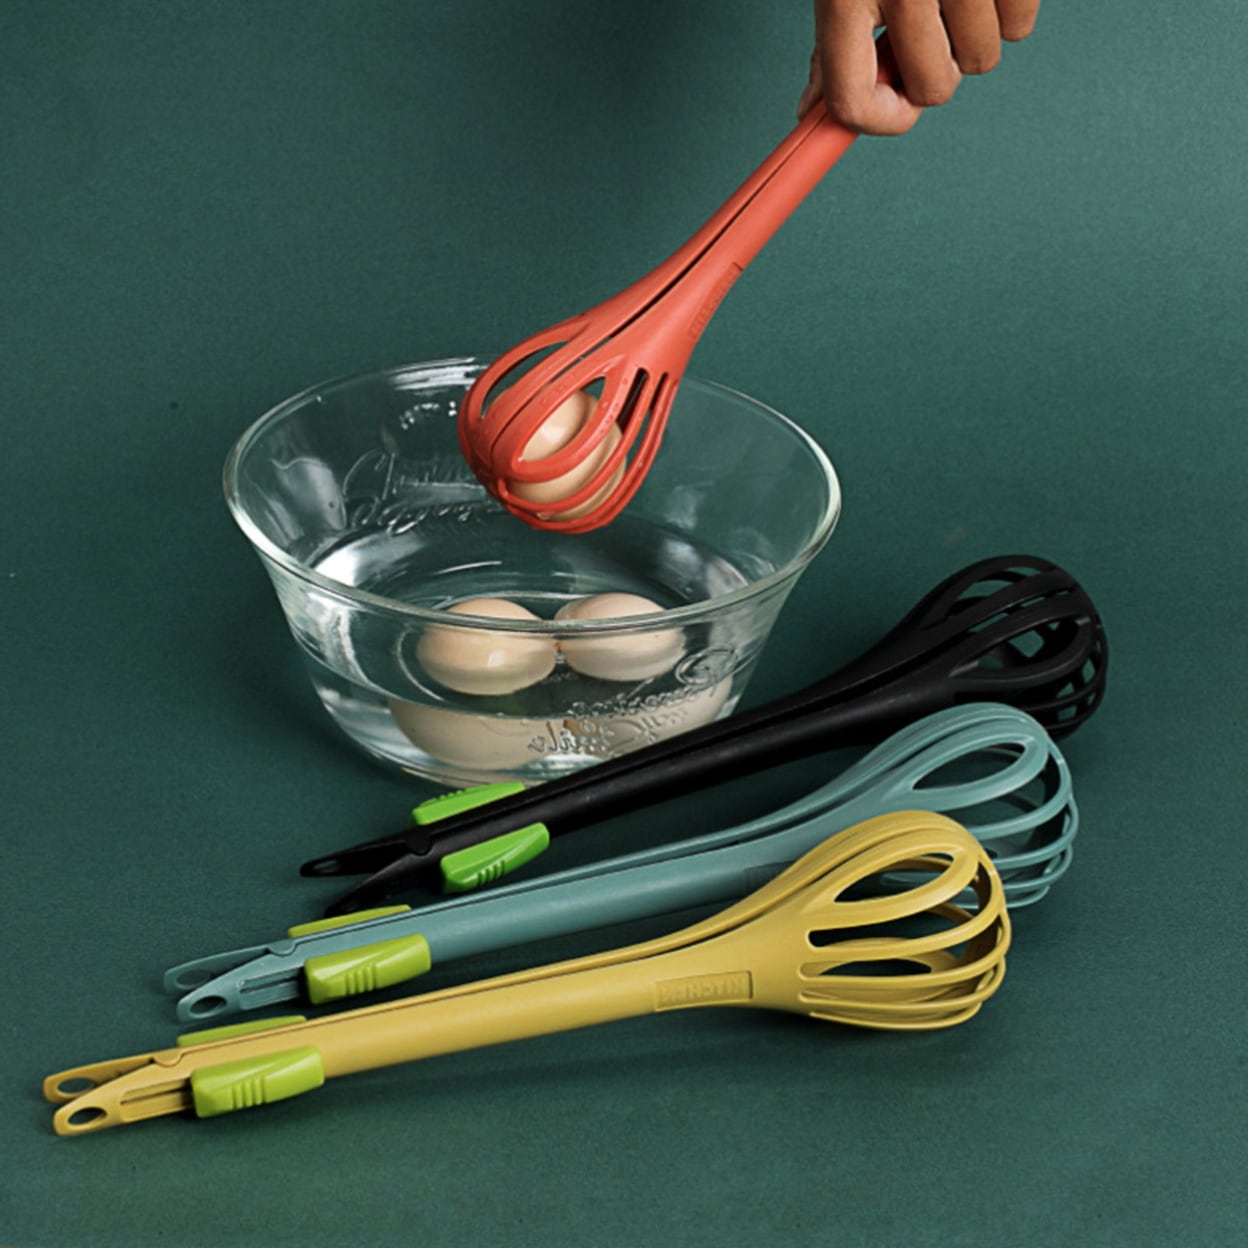 https://ak1.ostkcdn.com/images/products/is/images/direct/175b3a17cbe70ff9239234e33671c321be43adb8/Egg-Whisk-Tongs-Fast-Mixing-Multifunctional-With-Lock-Clip-Salad-Mixer-Tool-For-Kitchen.jpg